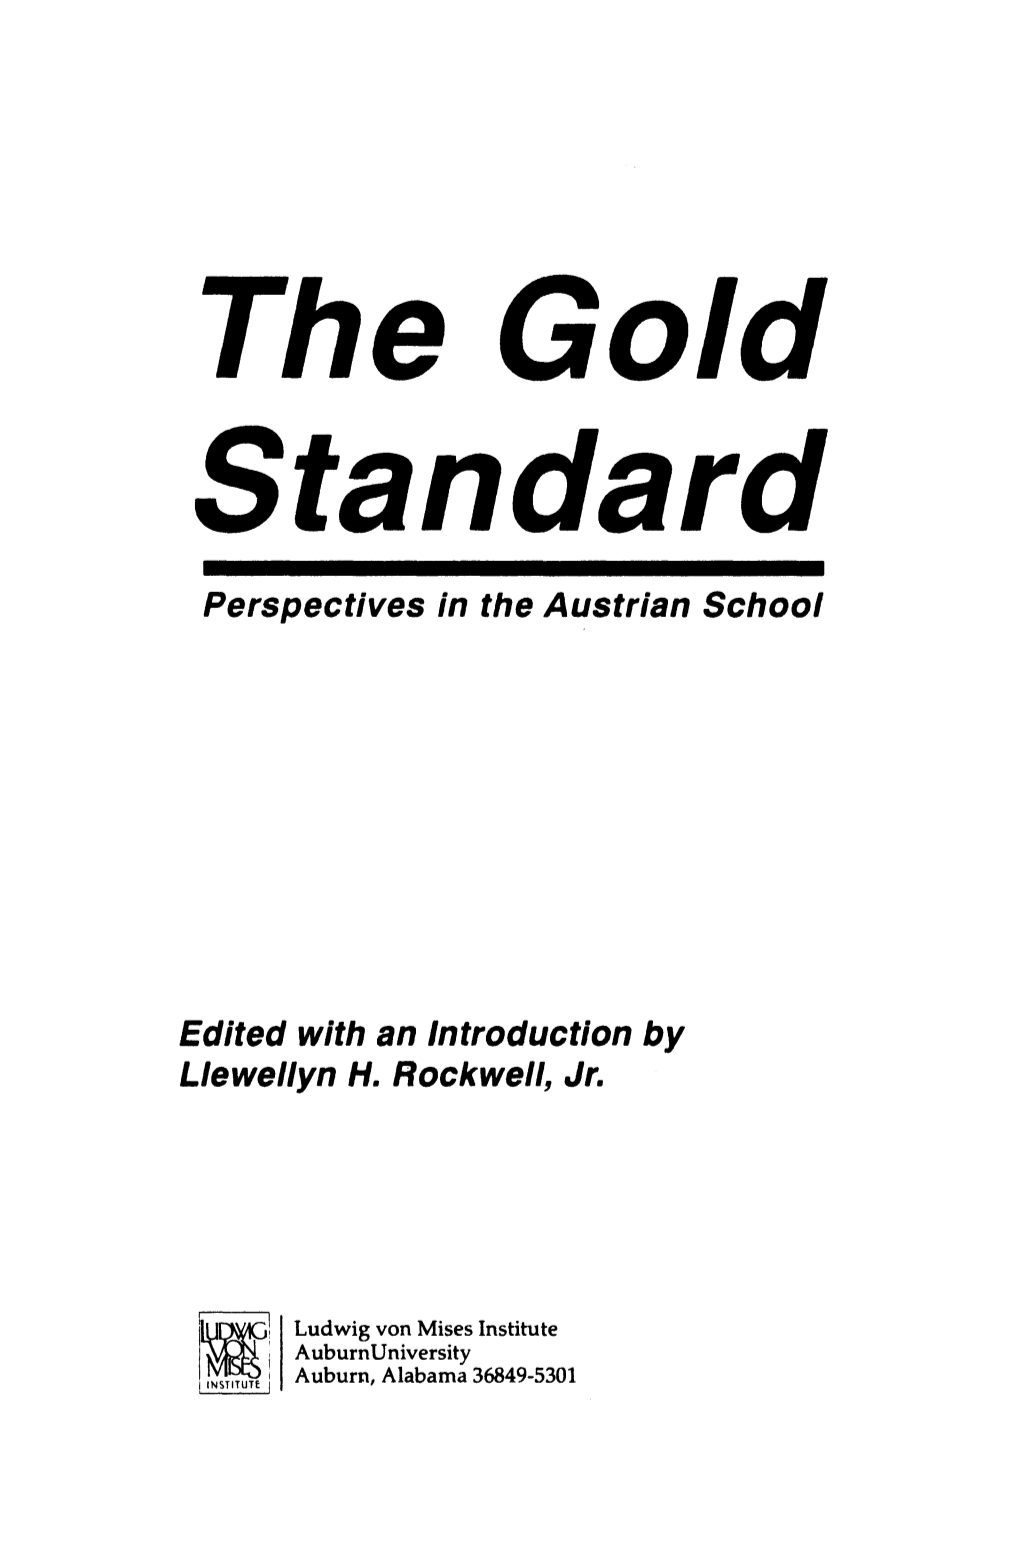 Gold Standard Perspectives in the Austrian School